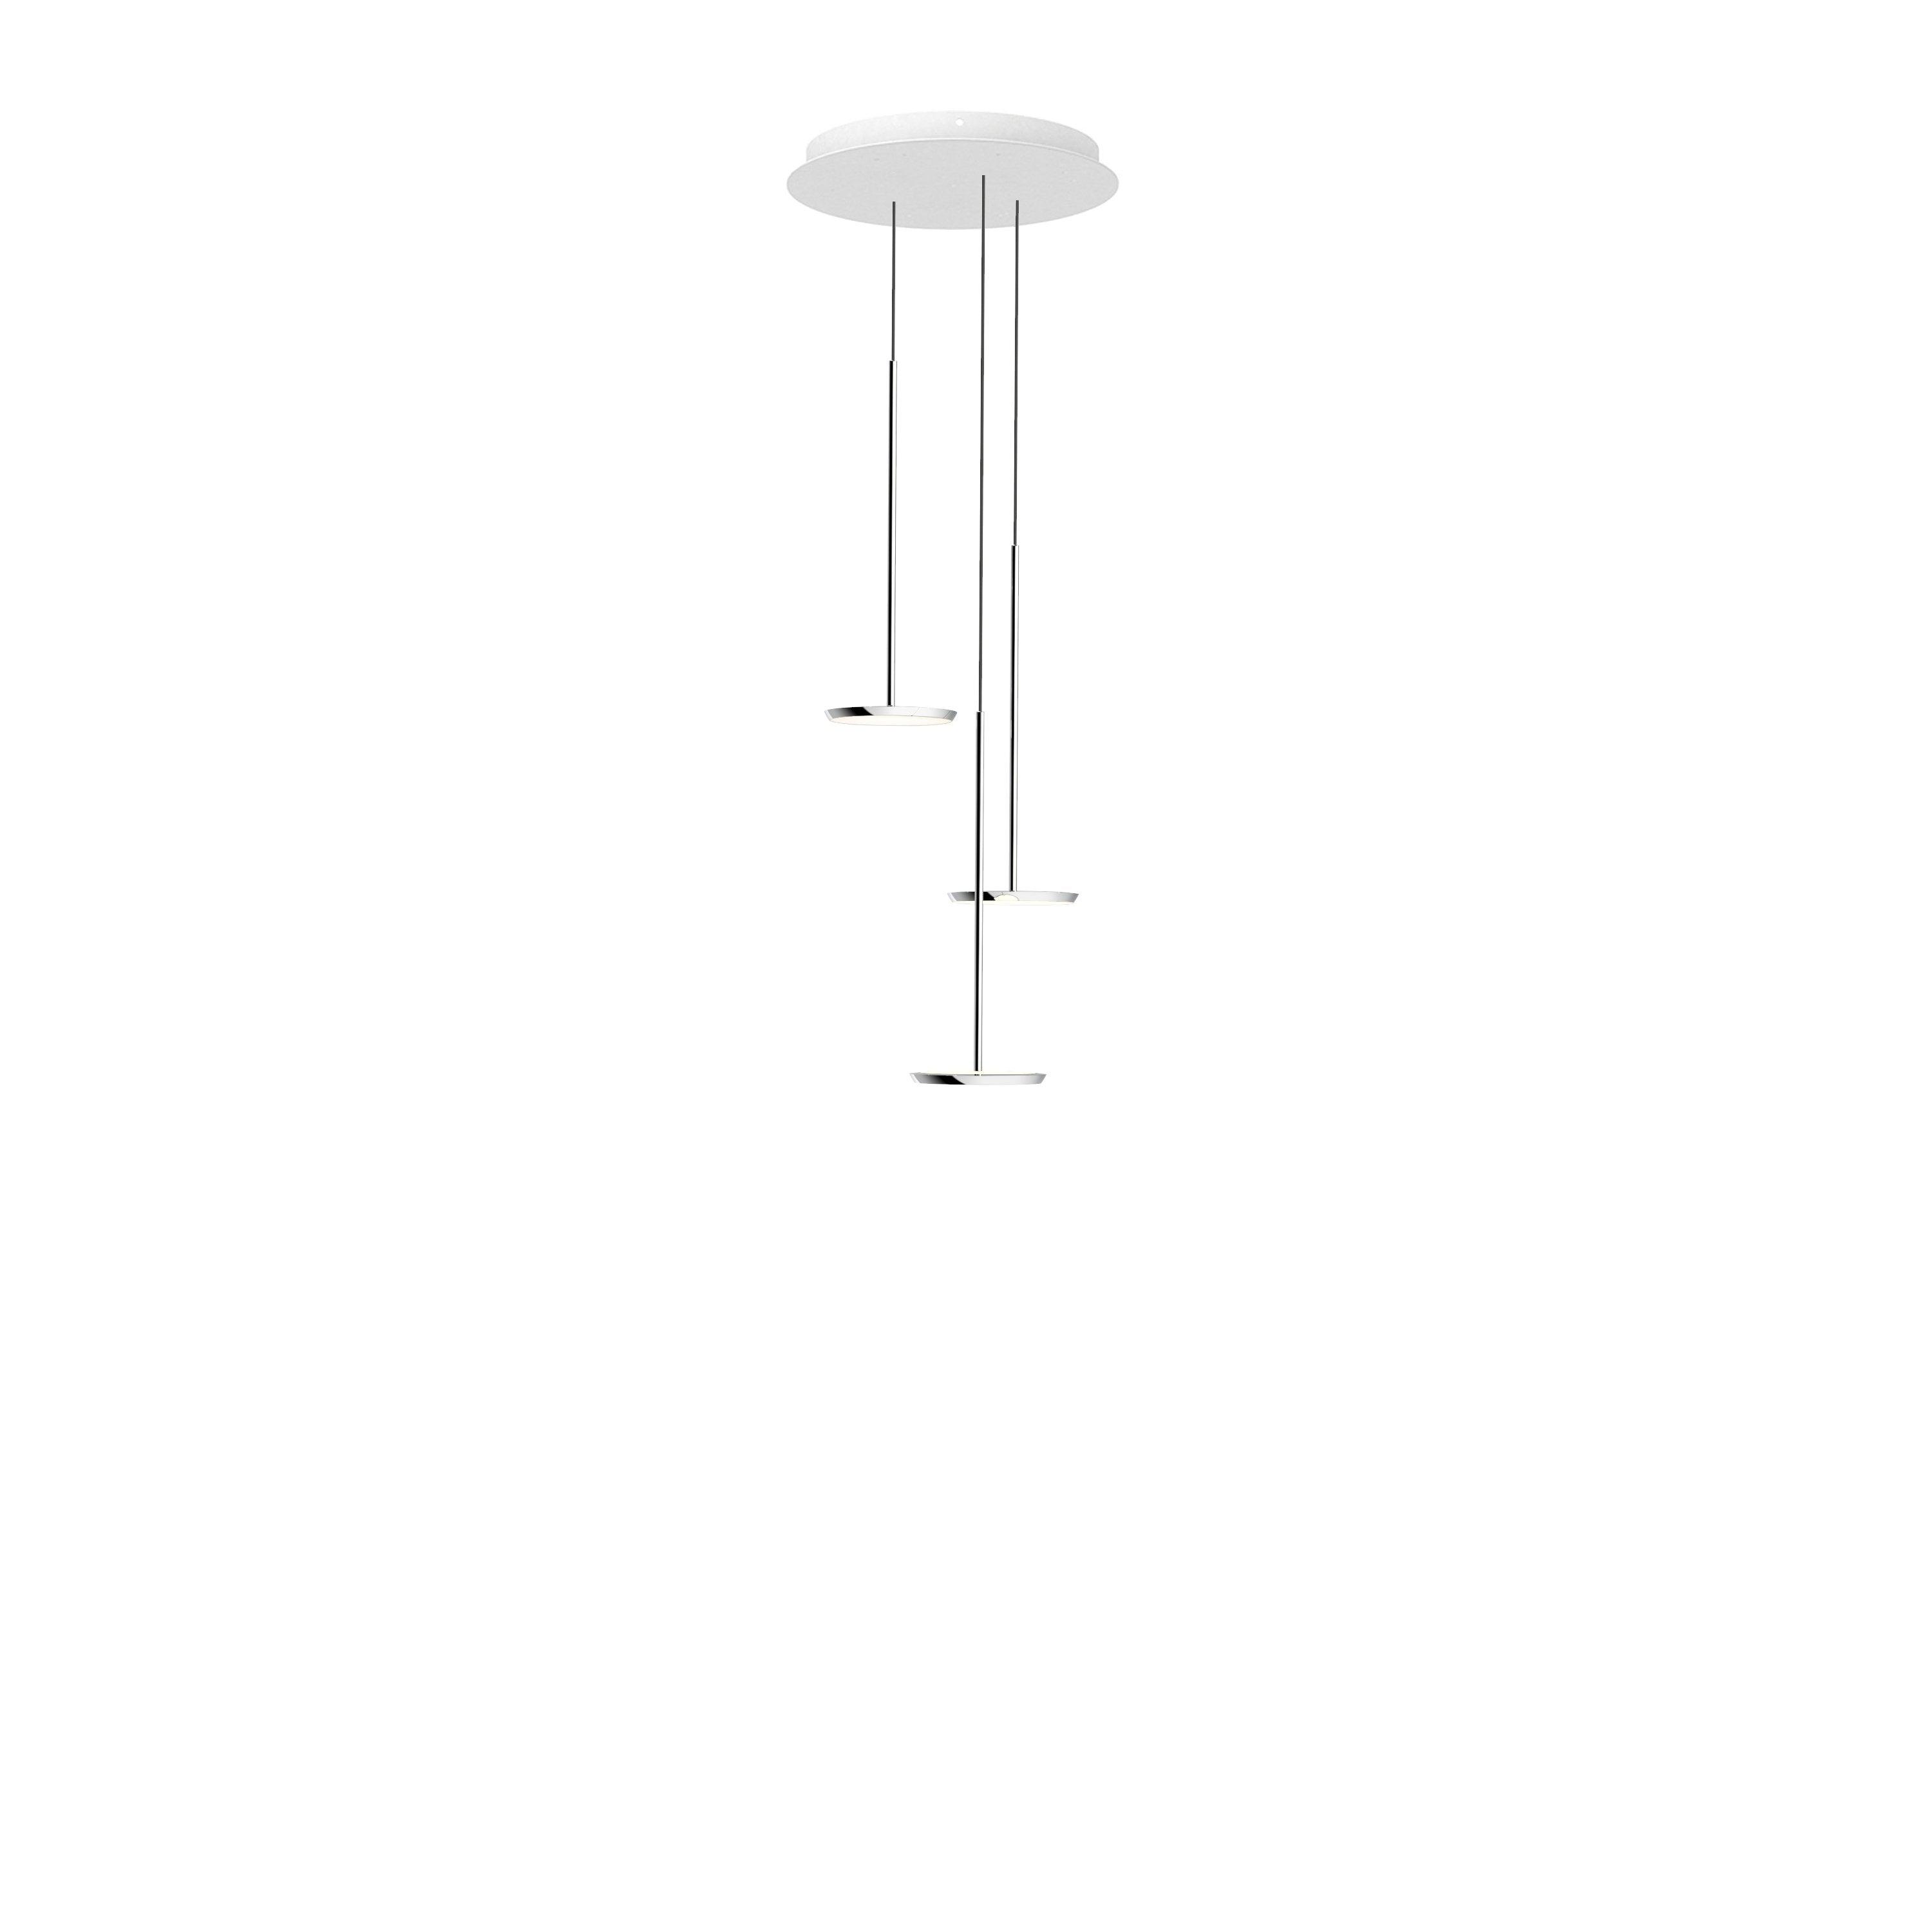 Pablo Designs - Sky Solo Chandelier - SKY 3 CHAND | Montreal Lighting & Hardware